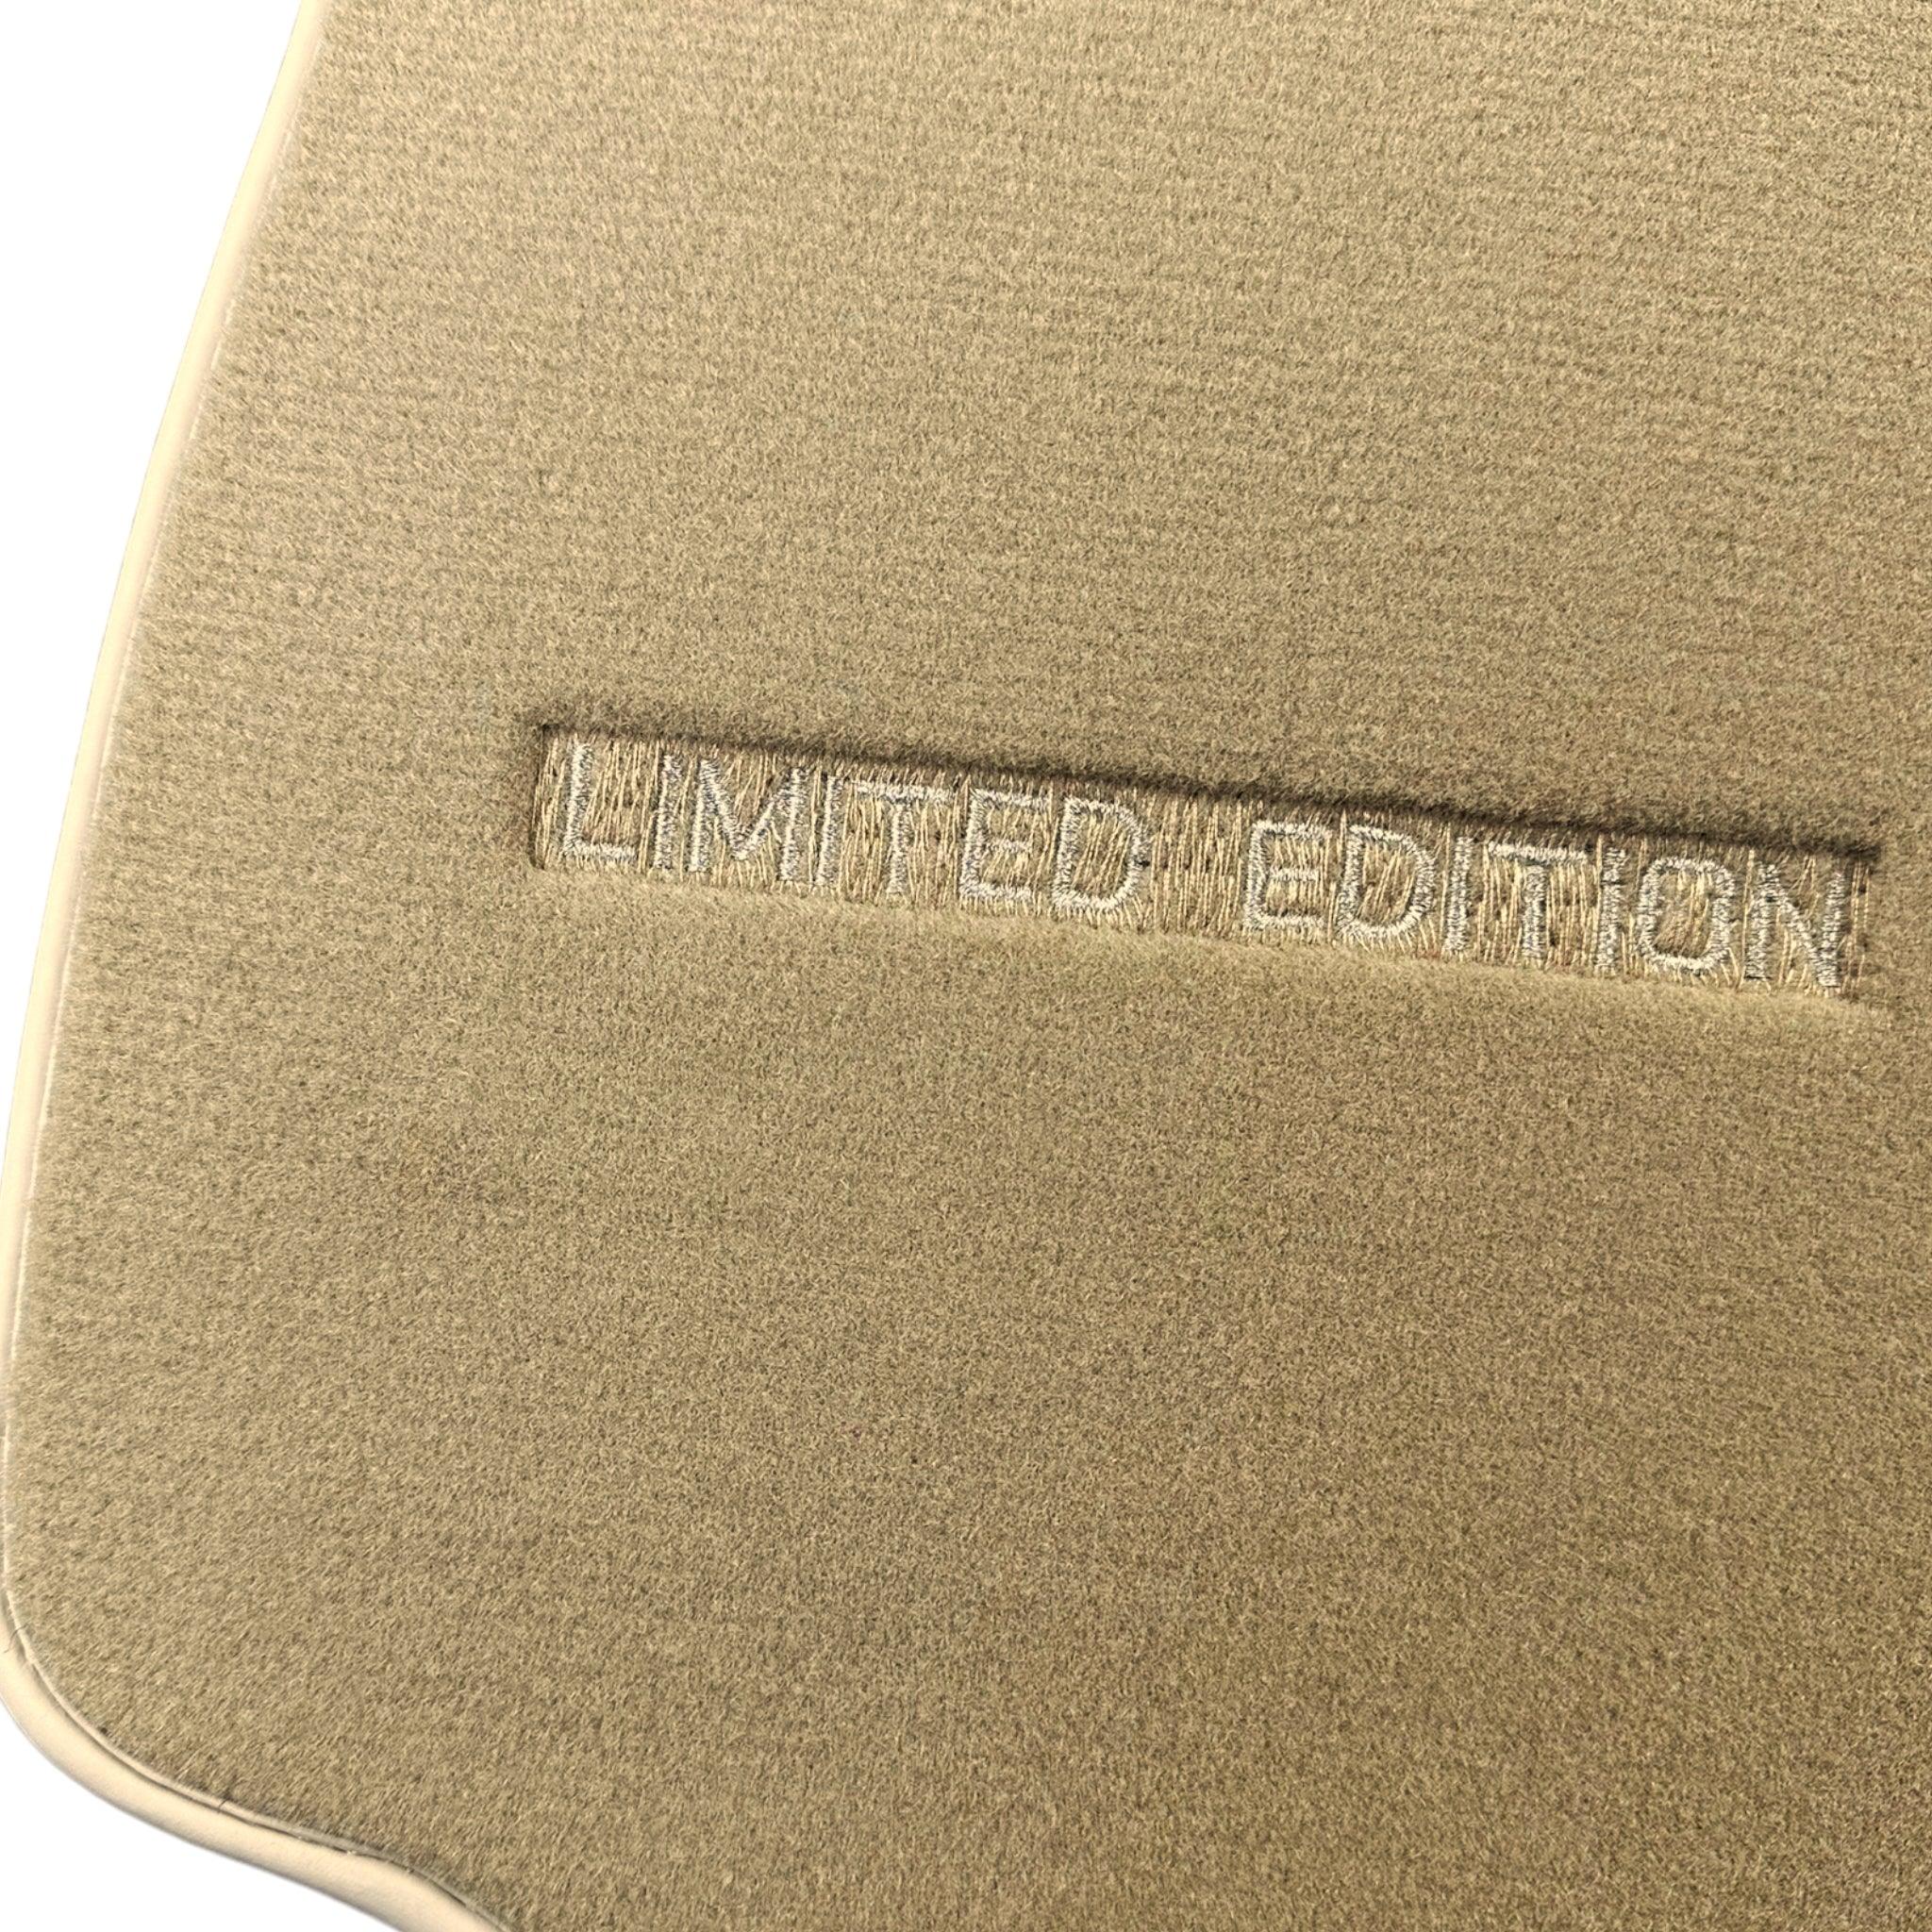 Beige Floor Mats For Mercedes Benz EQA-Class H243 (2021-2023) | Limited Edition